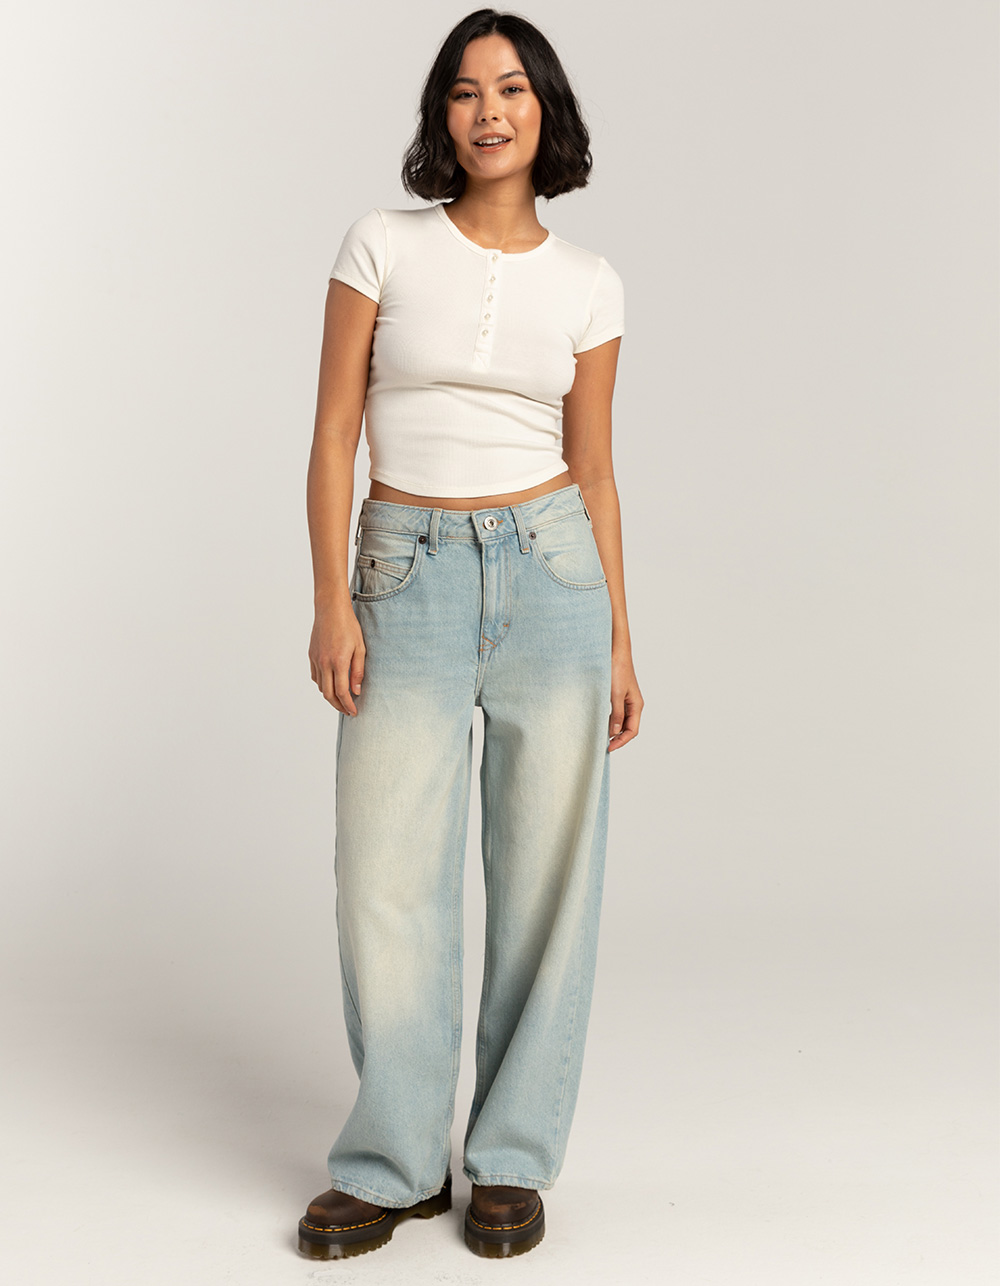 BDG jeans High Rise Baggy 28 31” inseam Urban Outfitters